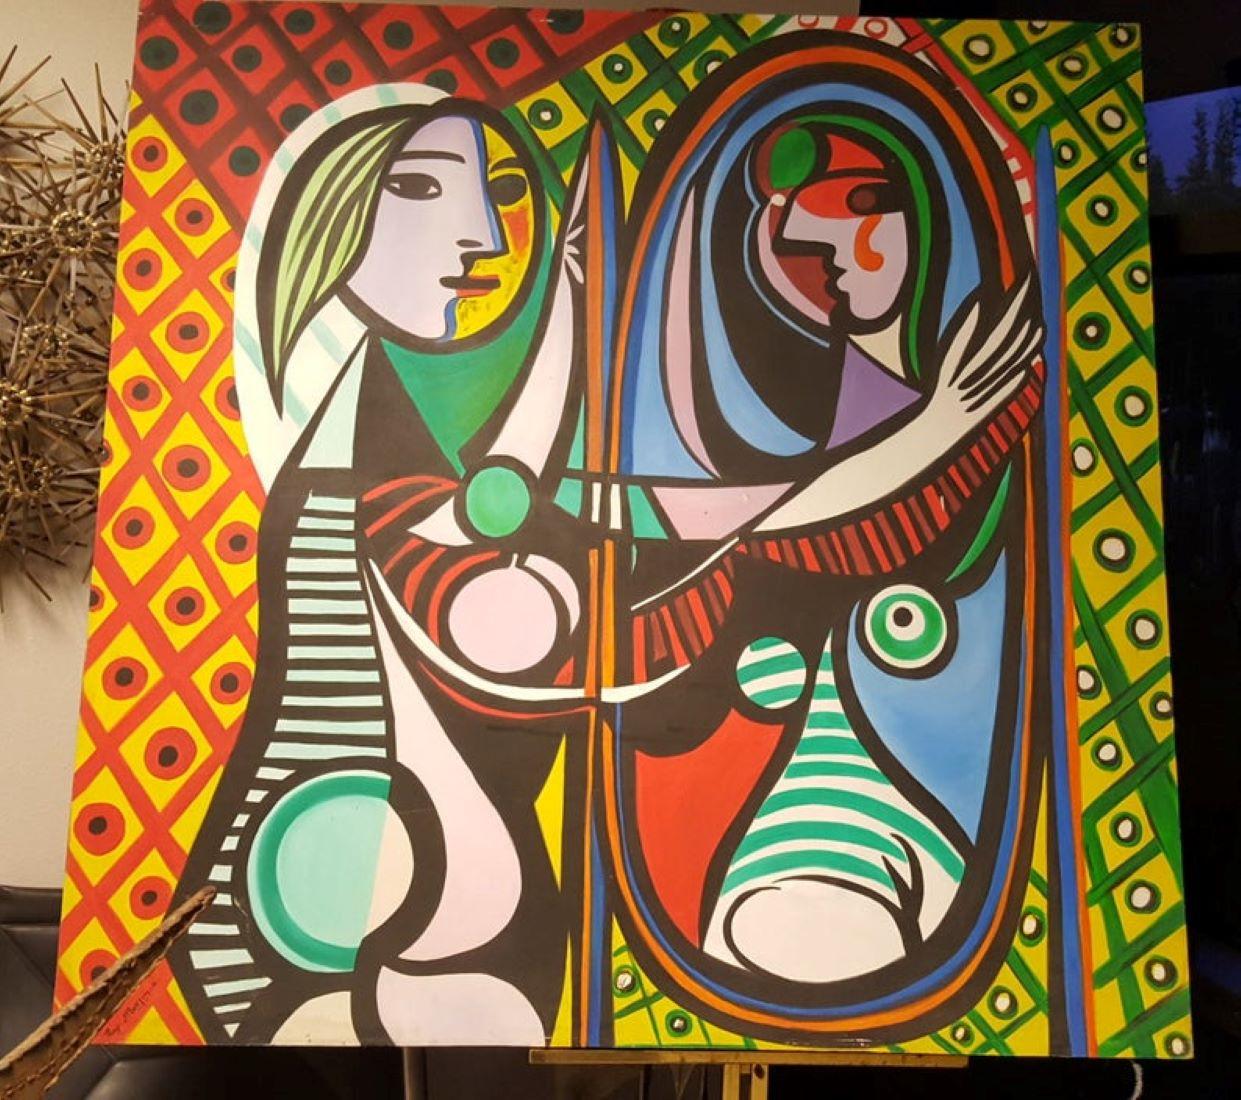 1946 Vintage Ray Martinez oil on canvas rendering of the girl before a mirror.

1946 oil on canvas rendering by artist Ray Martinez during Picasso's cubism period. The canvas is titled in spanish and dated 1946 on back of canvas with artist's